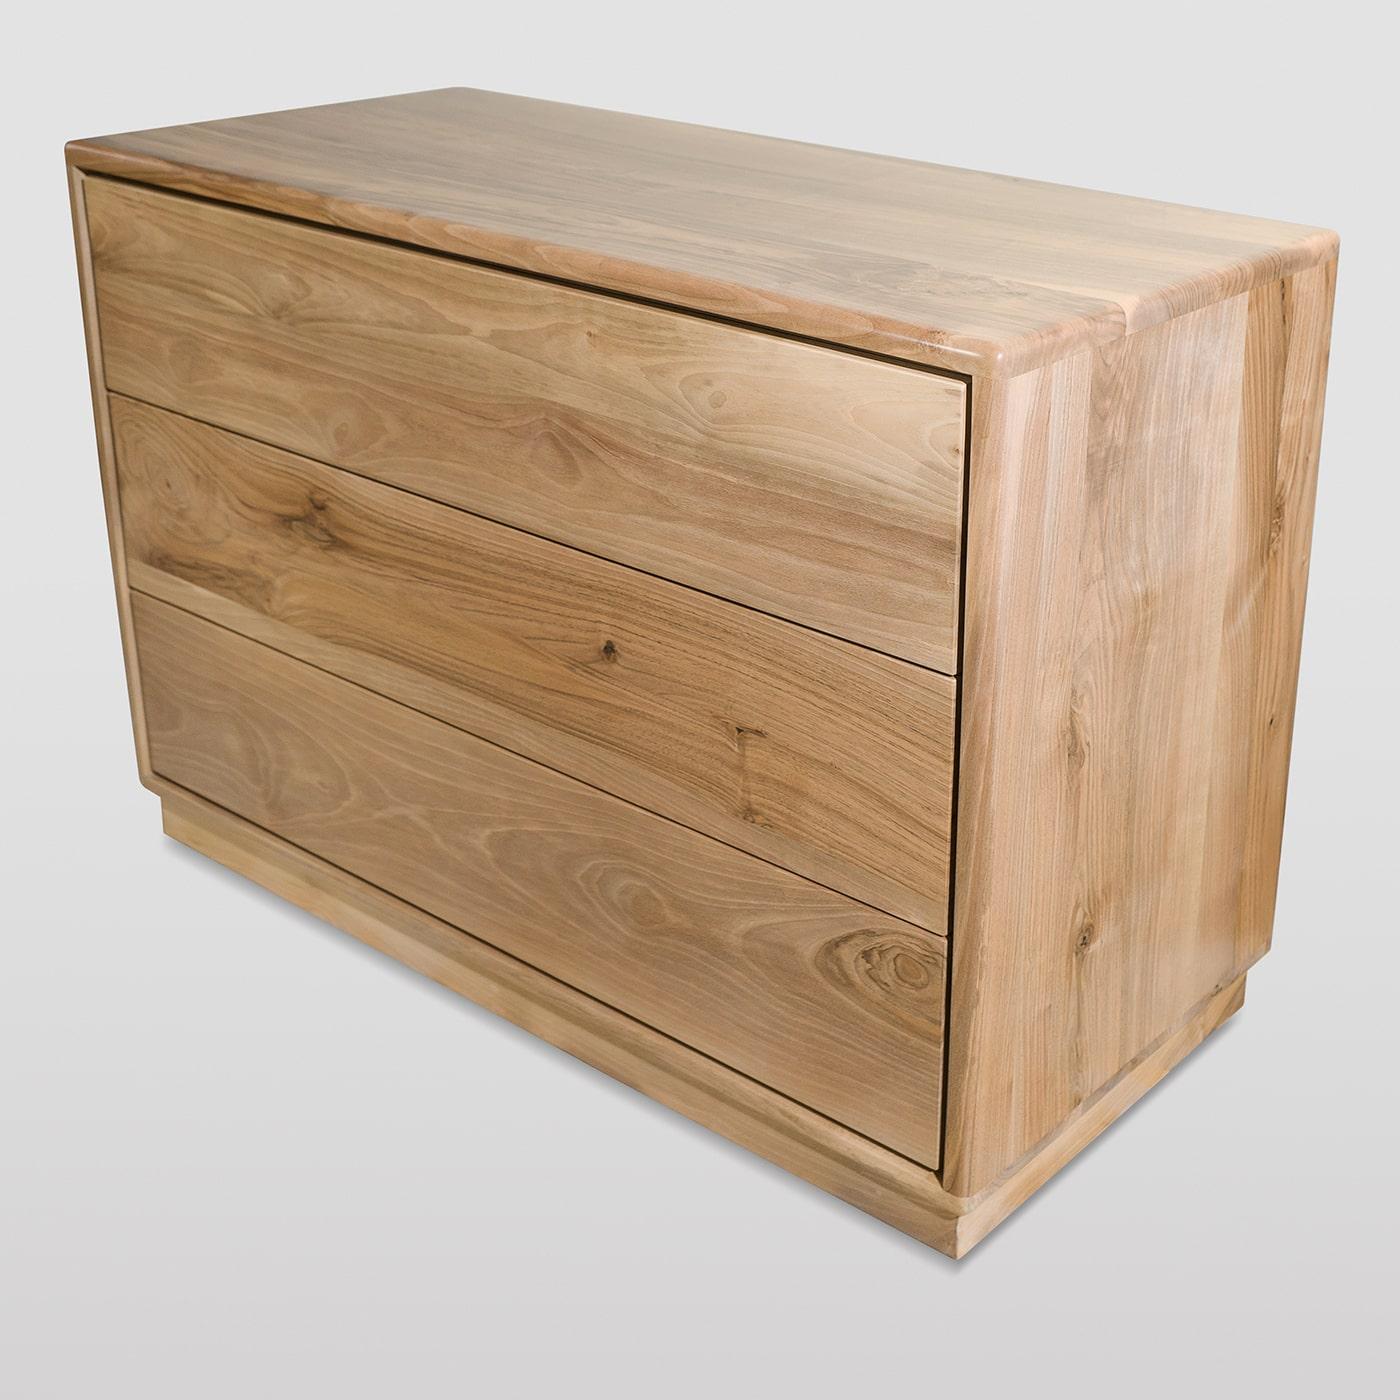 A superb expression of minimalist Nordic-inspired design, this dresser features three linear drawers and is handcrafted of solid Italian walnut. Internally fashioned of solid beechwood, the drawers are handle-free and feature a touch opening system